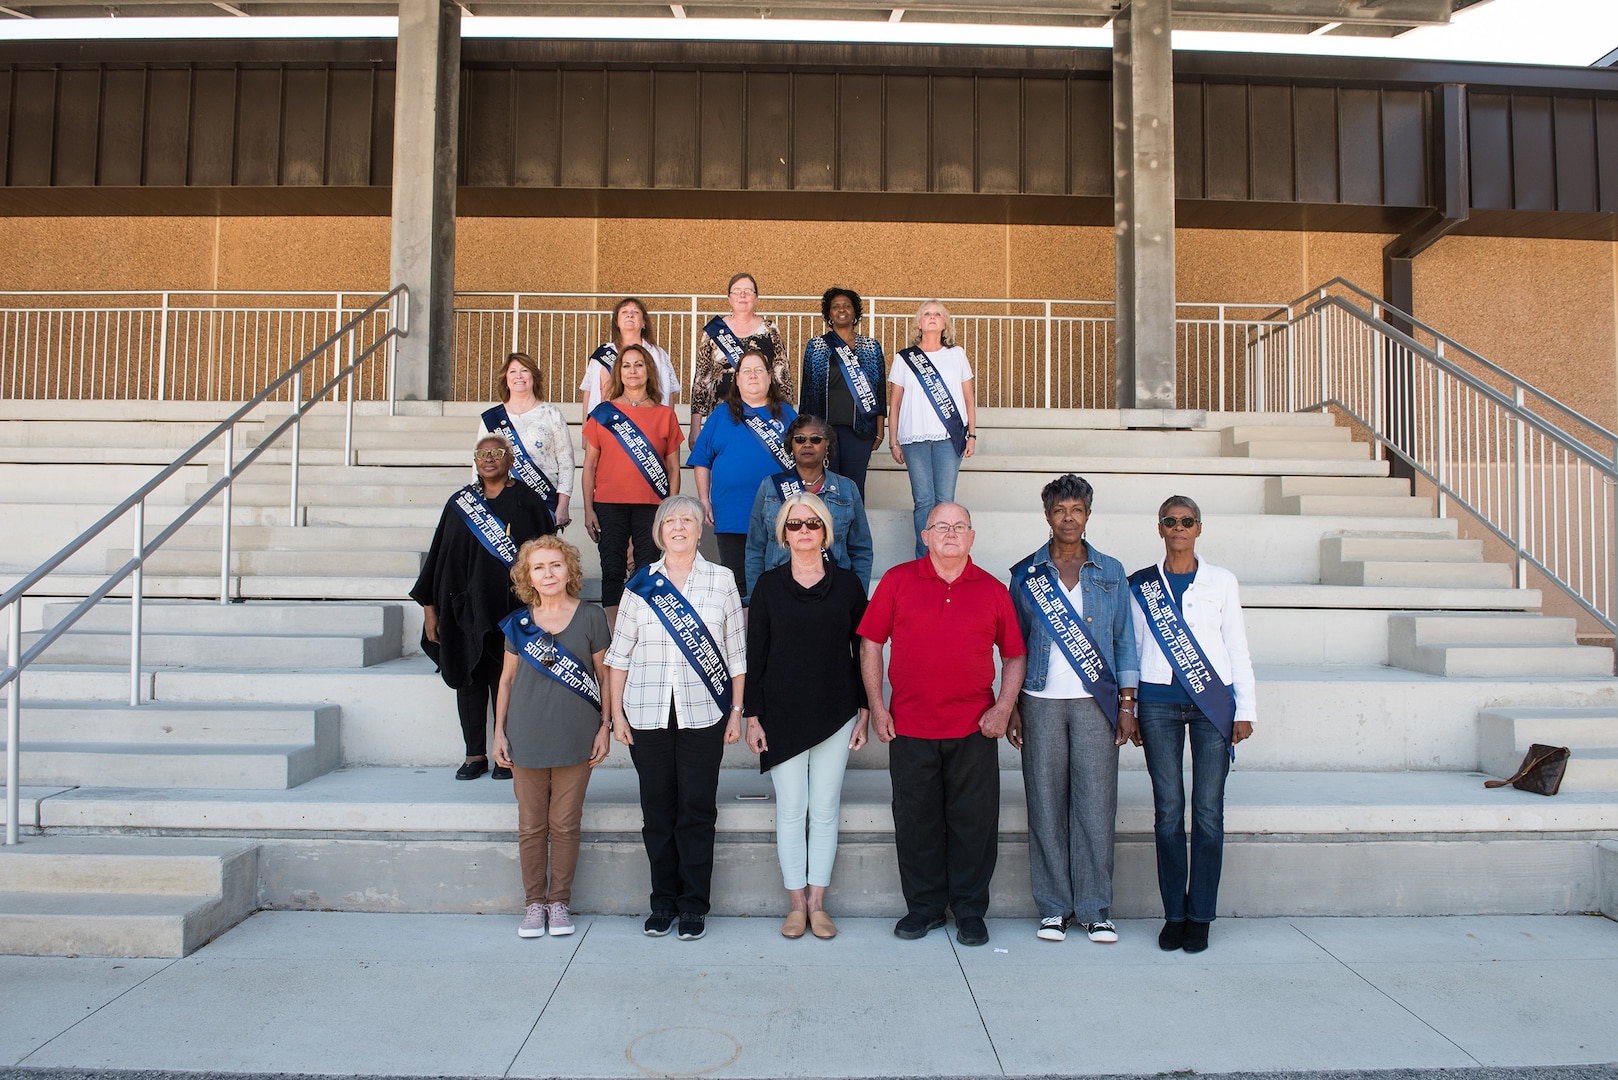 The women of flight W039, 3707th Squadron, of 1979, pose for a recreation of their group photo, Oct. 18, 2019, at Joint Base San Antonio-Lackland, Texas.